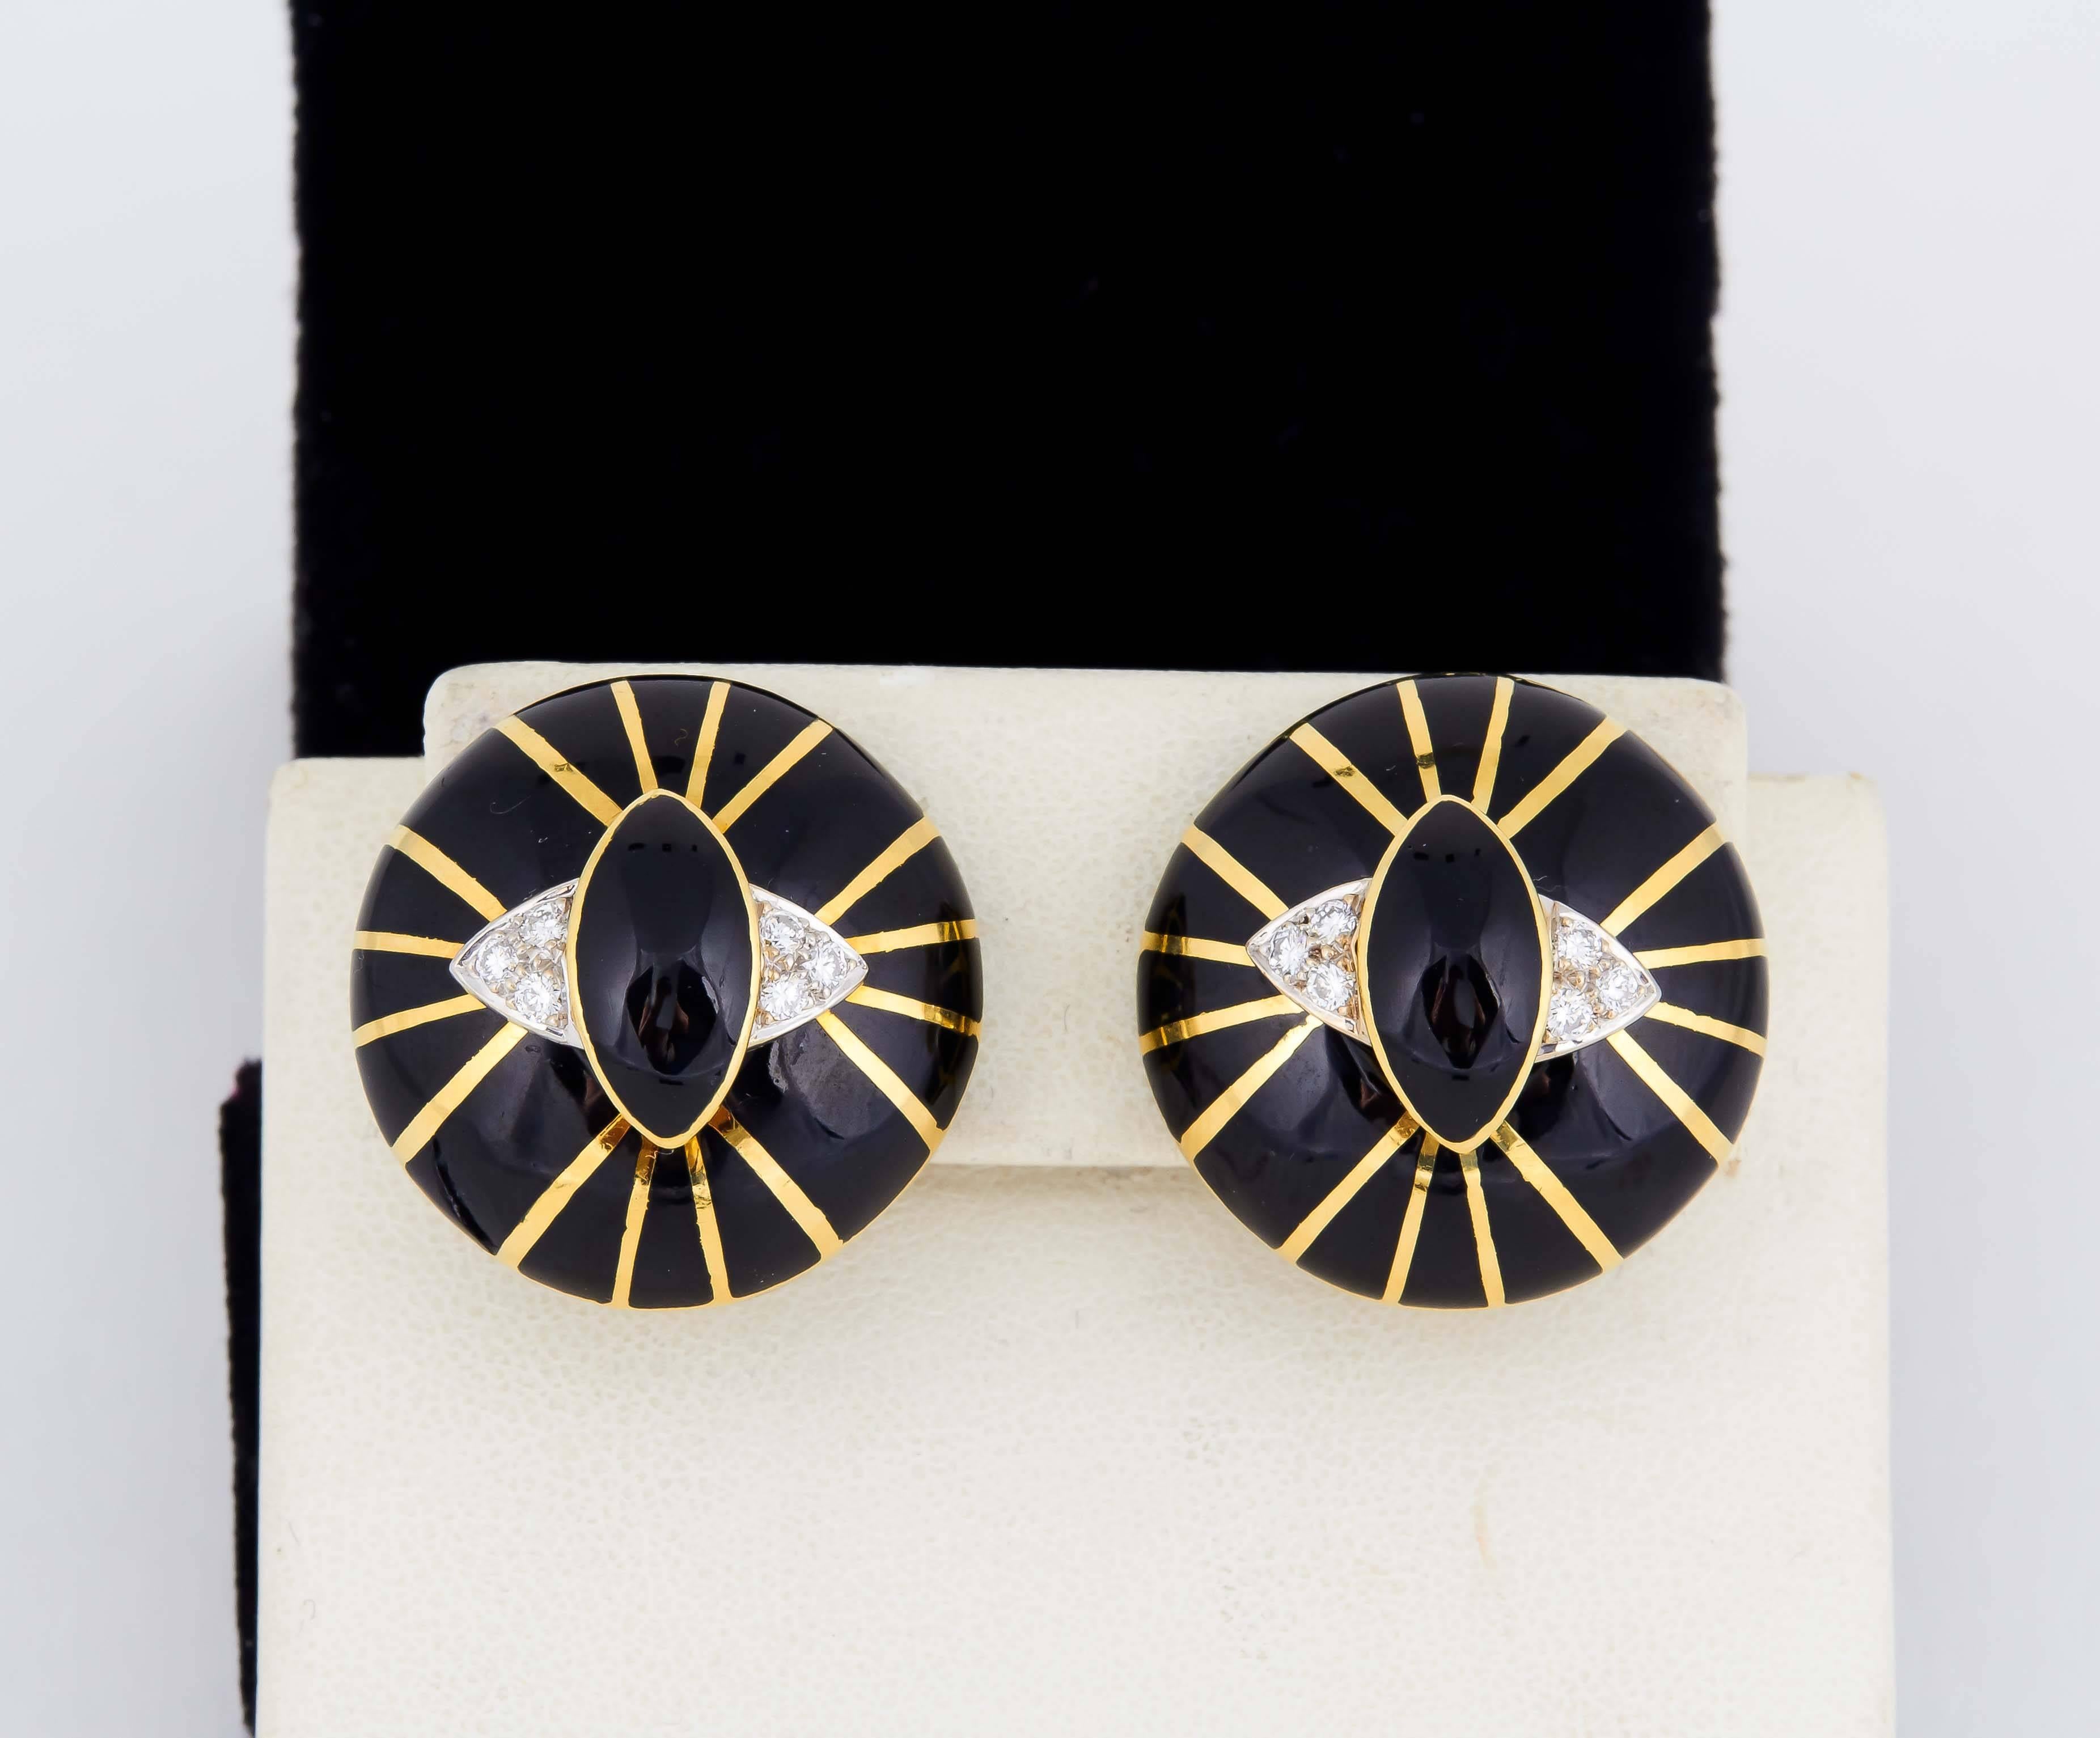 18kt Gold Solid Earclips Designed With a SpiderWeb Motif ecorated With Black Enamel And Gold Panels To Emulate A SpiderWeb Embellishment. entering 2 6mm Cabochon Marquis Cut Onyxes And Further Decorated With 12 full Cut Diamonds Weighing